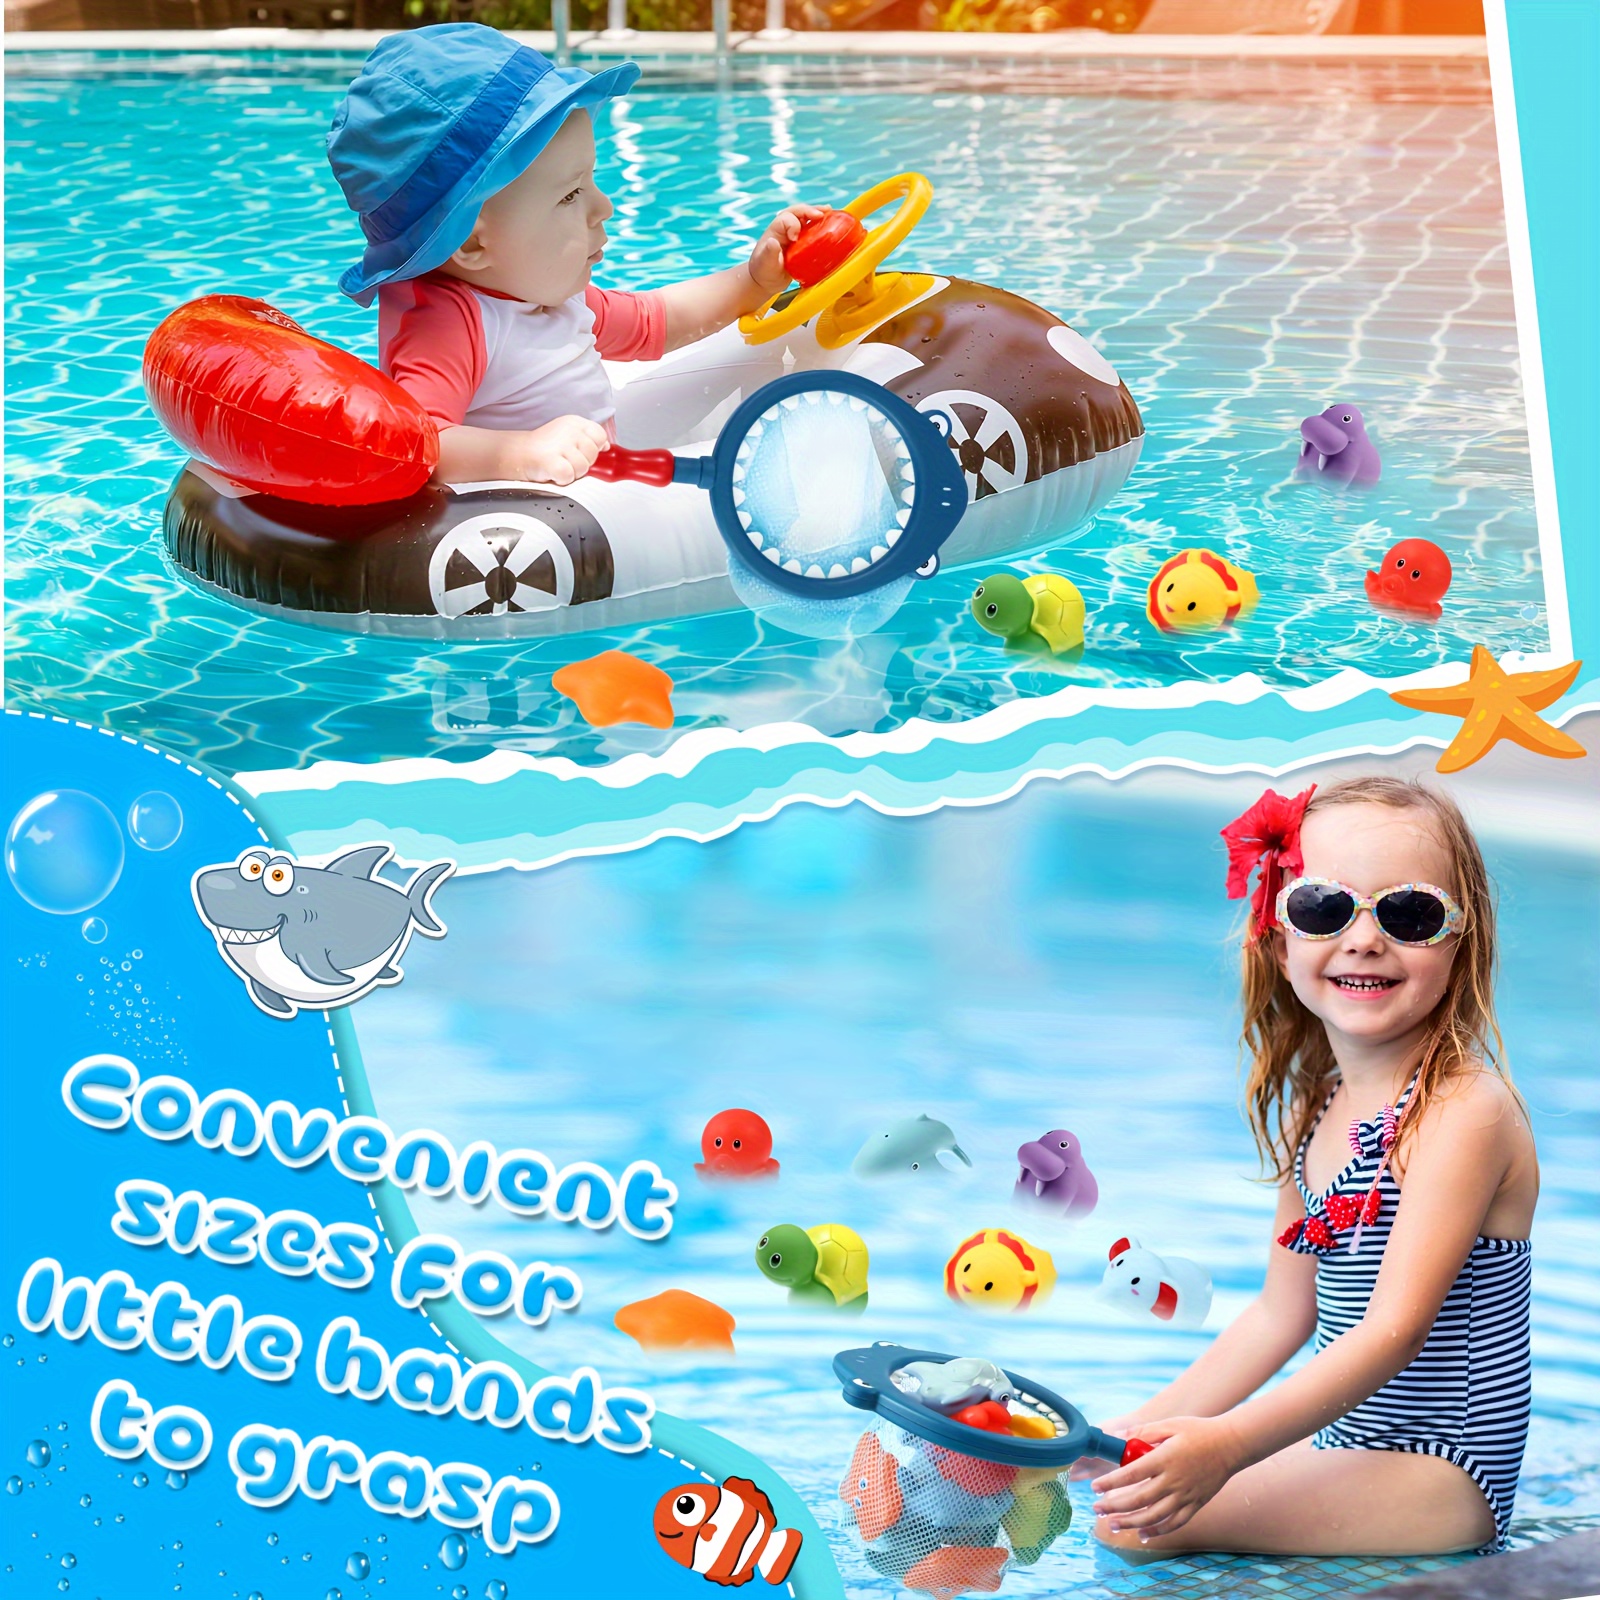 OBloved Shark Grabber Bath Toy with Fishing Net, Creativity Floating Toy &  Fishing Game, Bathtub Pals Marine Animals and Dinosaurs, Swimming Bath Tub,  Beach, Pool Play Set for Boys and Girls in